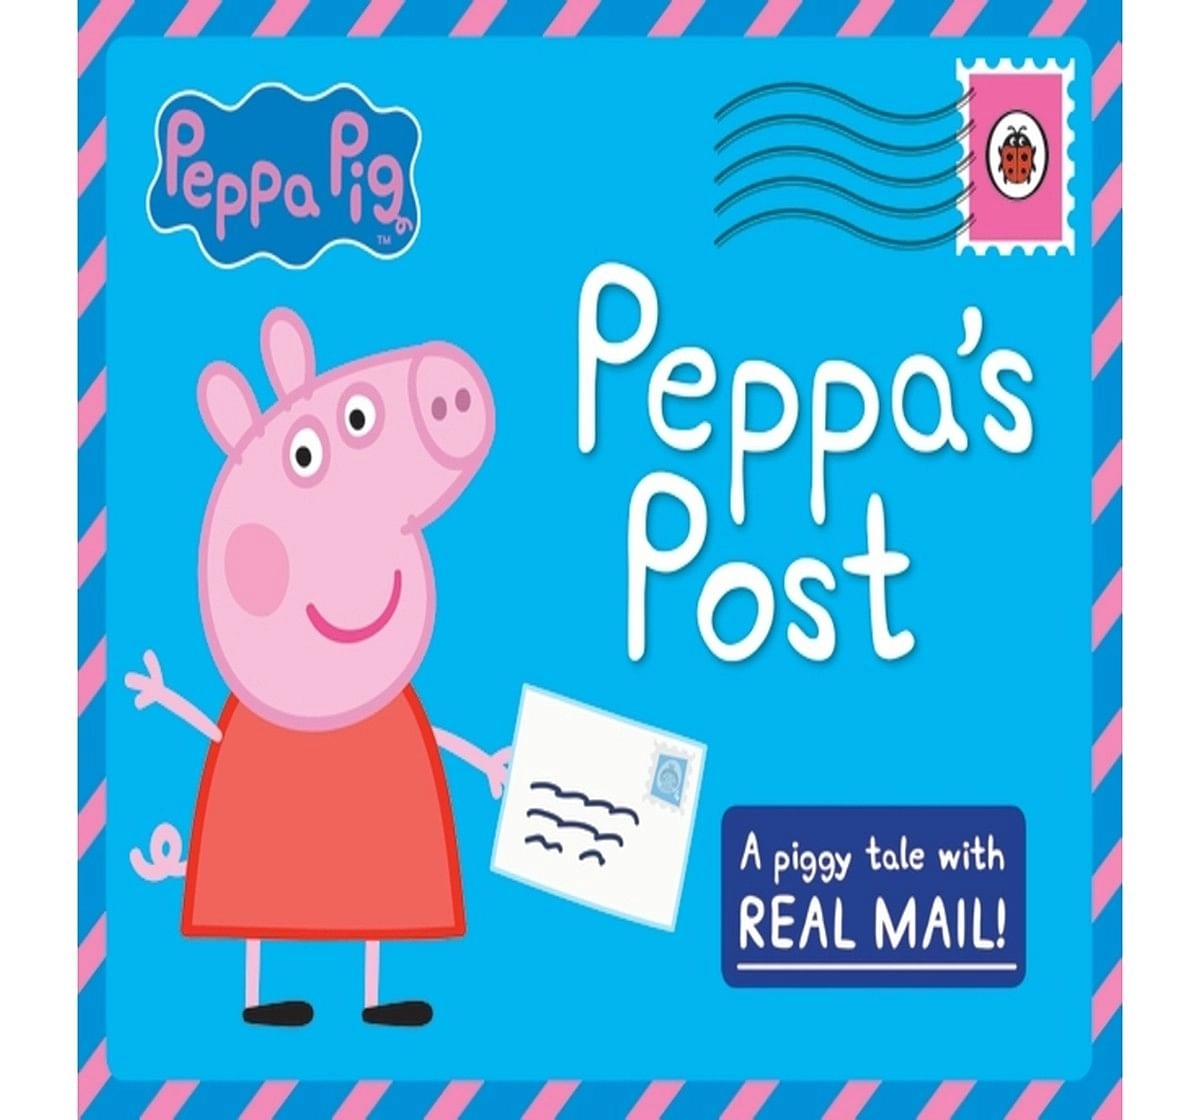 Peppa Pig : Peppa's Post, 48 Pages Book by Ladybird, Hardback